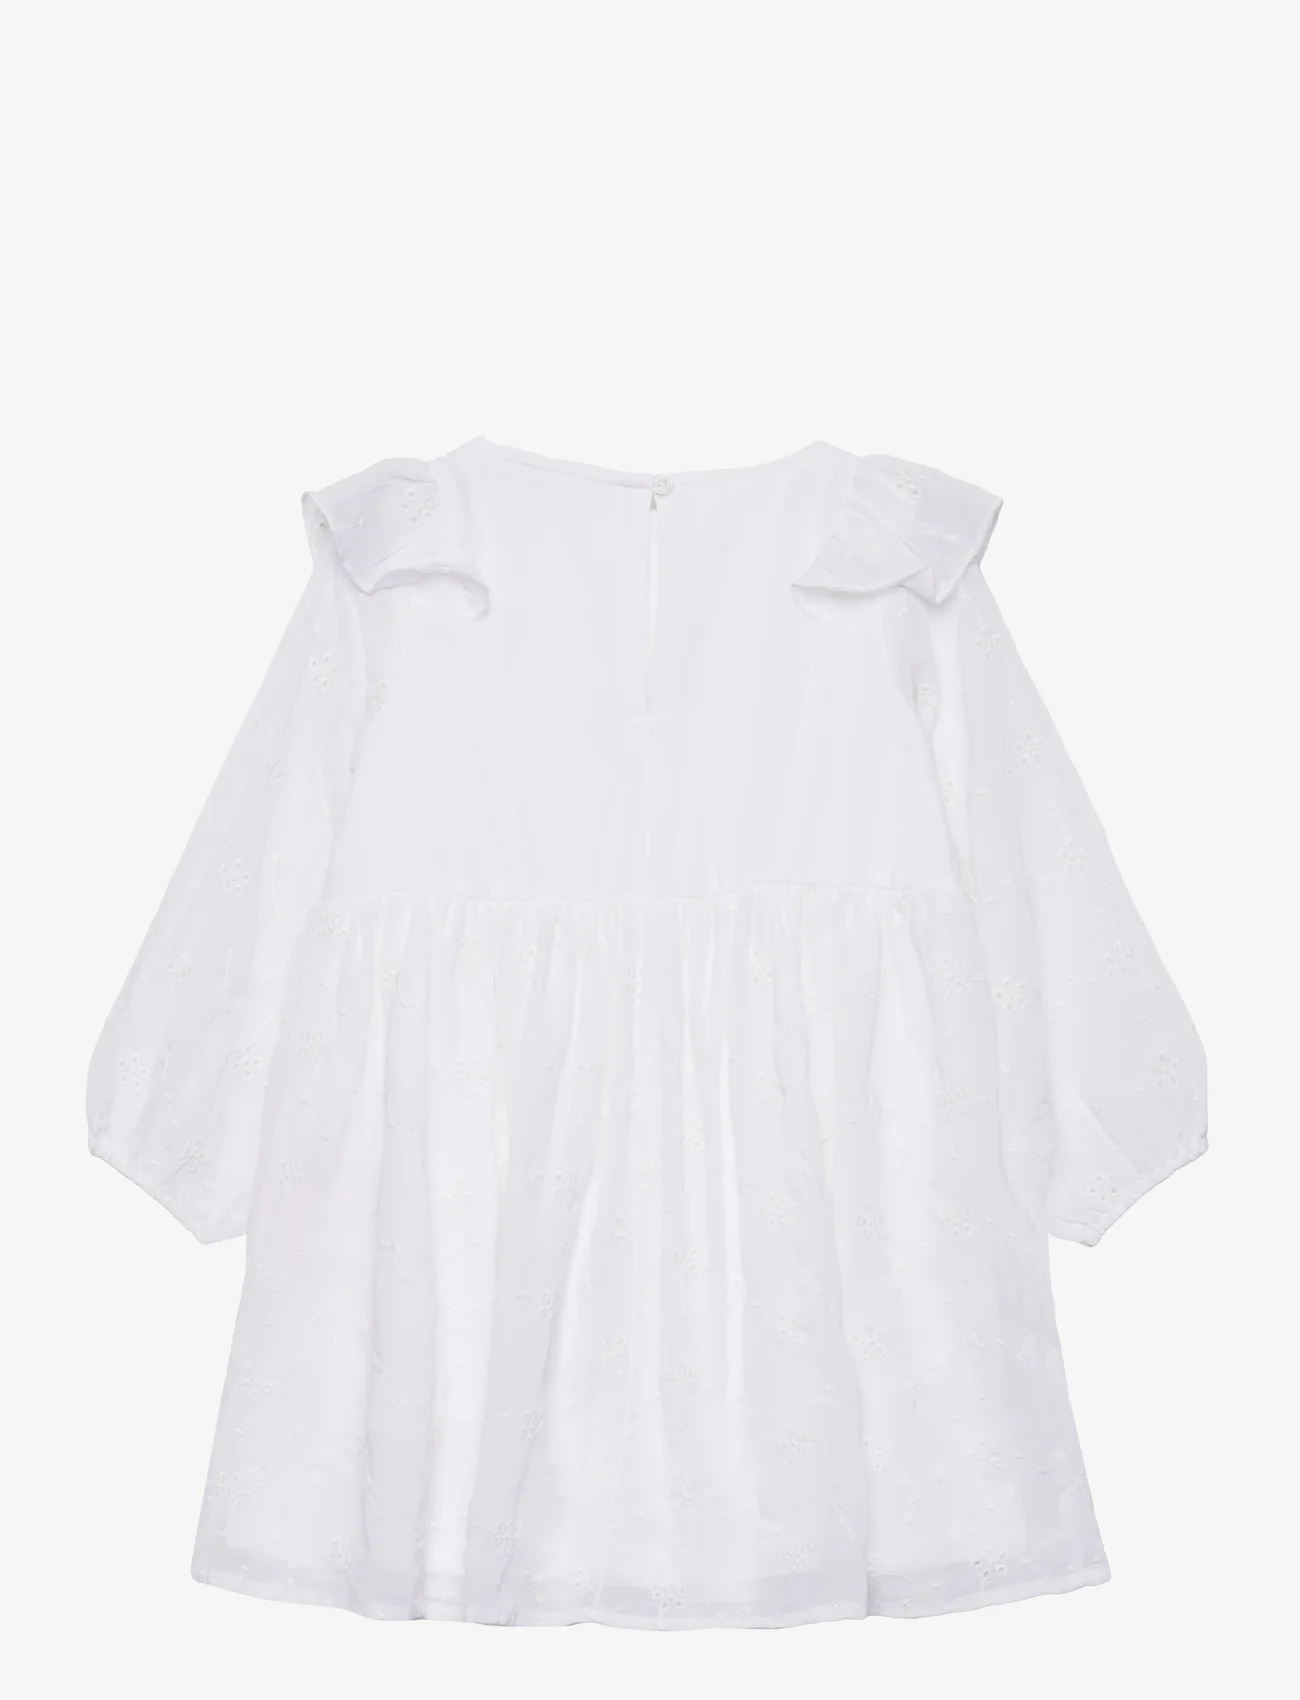 name it - NMFFORRA LS DRESS - long-sleeved casual dresses - bright white - 1